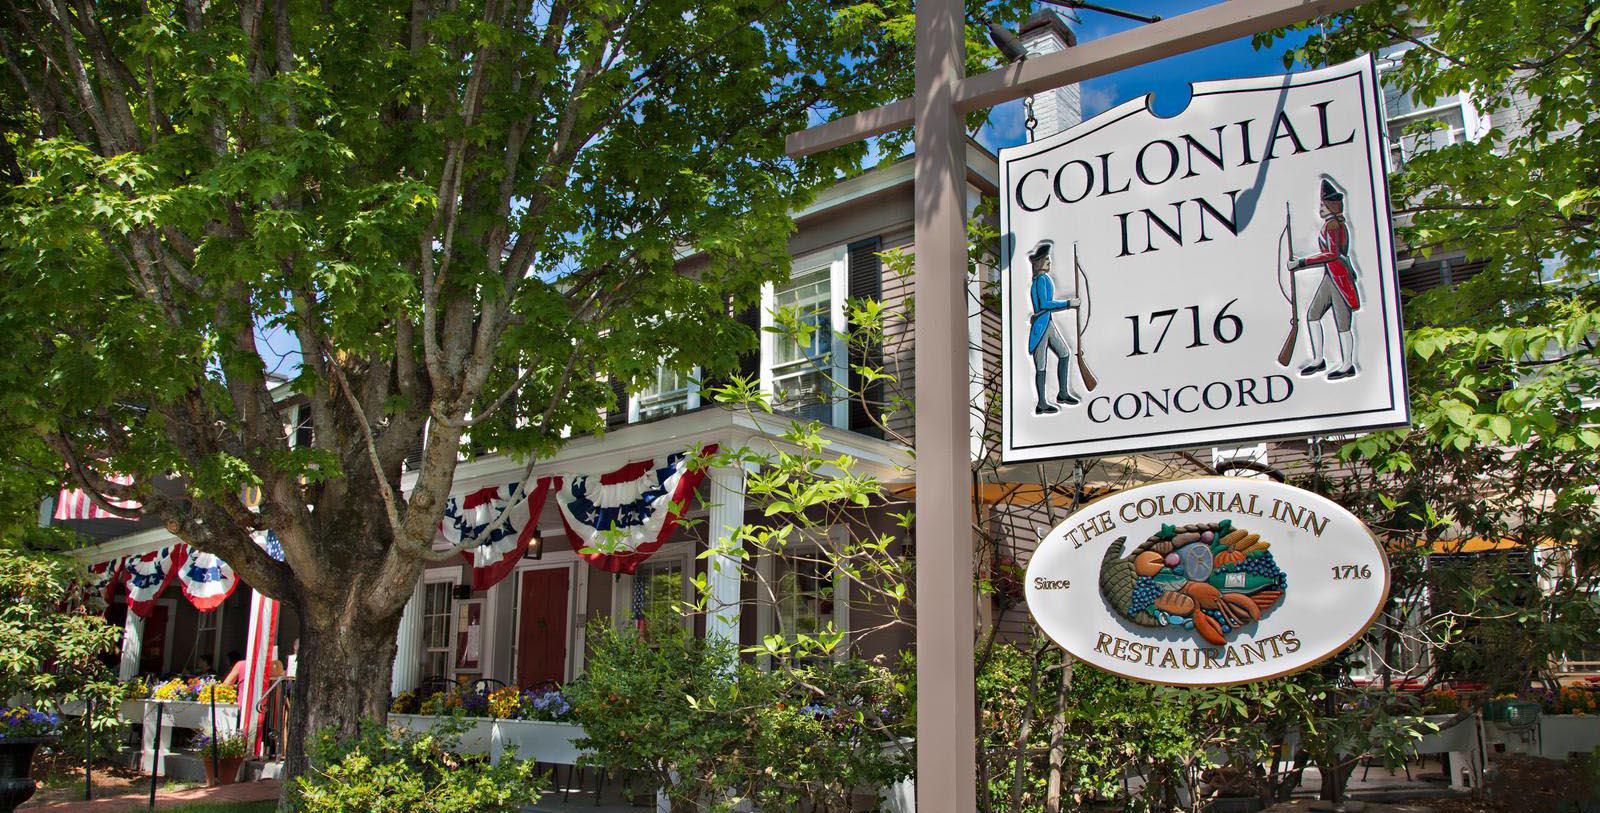 Image of Hotel Exterior at Concord's Colonial Inn, 1716, Member of Historic Hotels of America, in Concord, Massachusetts Special Offers, Discounted Rates, Families, Romantic Escape, Honeymoons, Anniversaries, Reunions